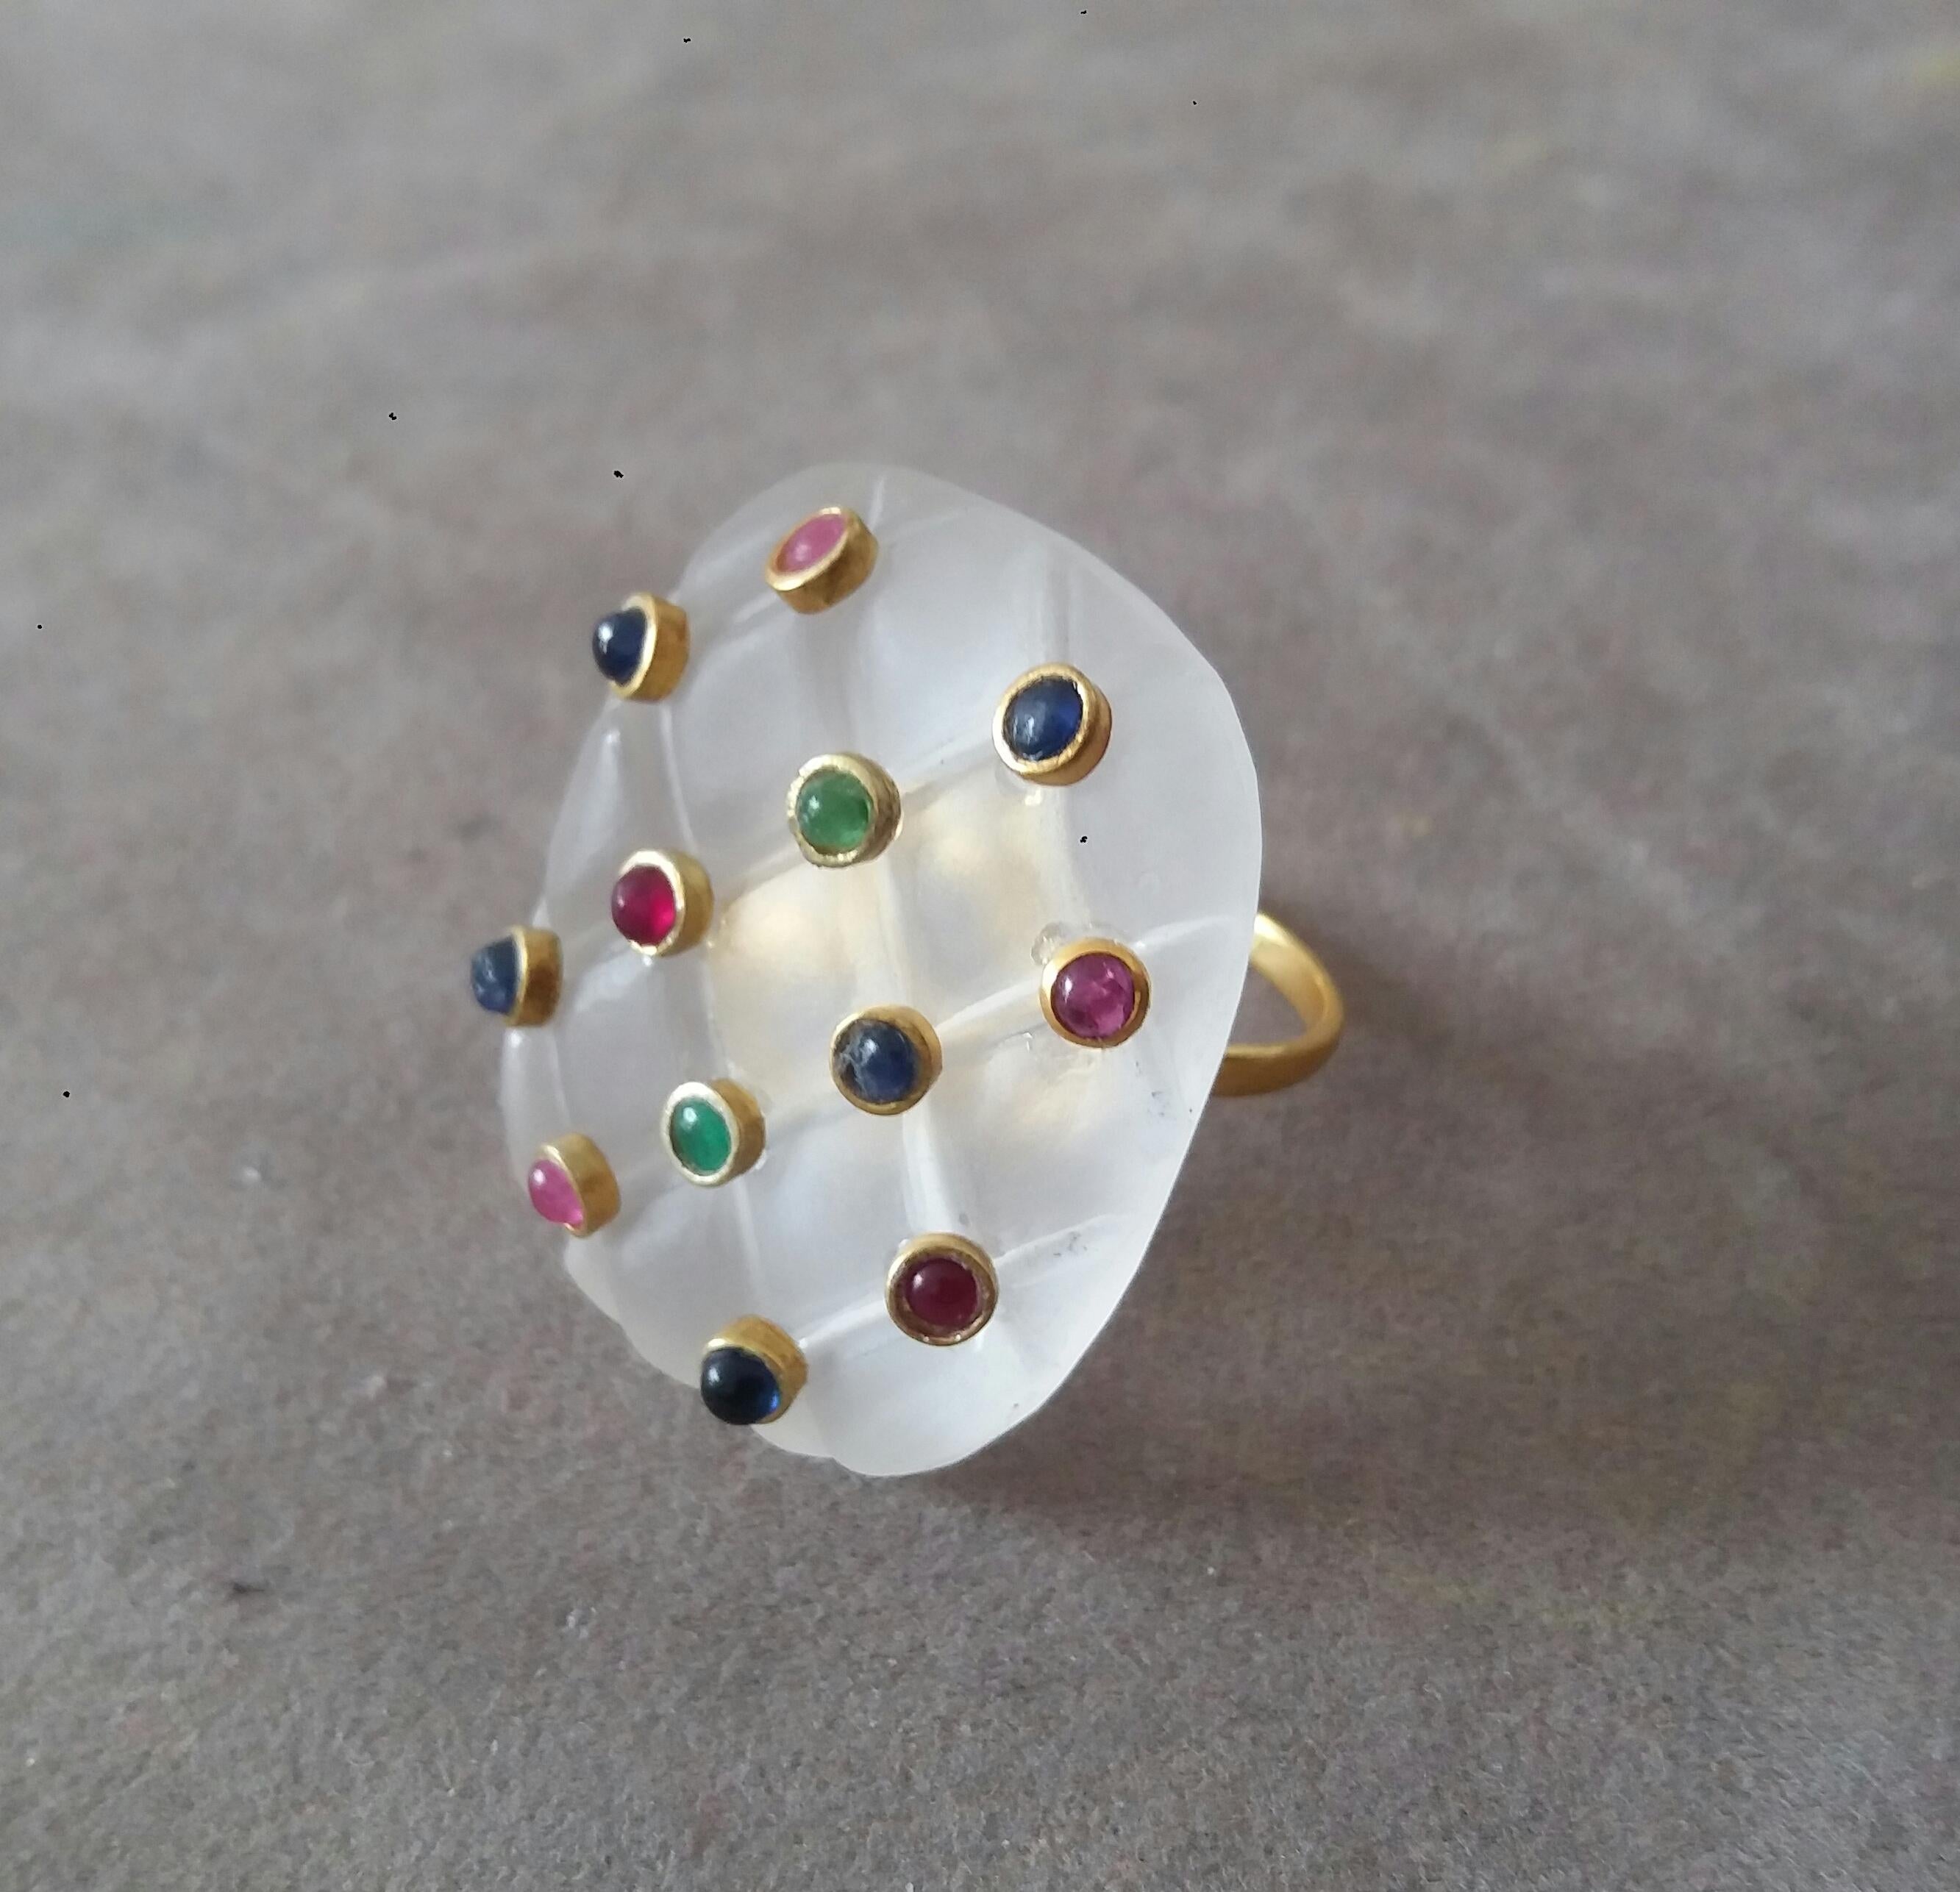 Extremely Stylish and Unique Ring composed by a Natural Cushion Shape Quartz  measuring 27 x 34 mm and weighing 80 Carats, decorated with 12 small round Rubies, Emeralds and Blue Sapphires set in 14K yellow small gold bezels.

In 1978 our workshop